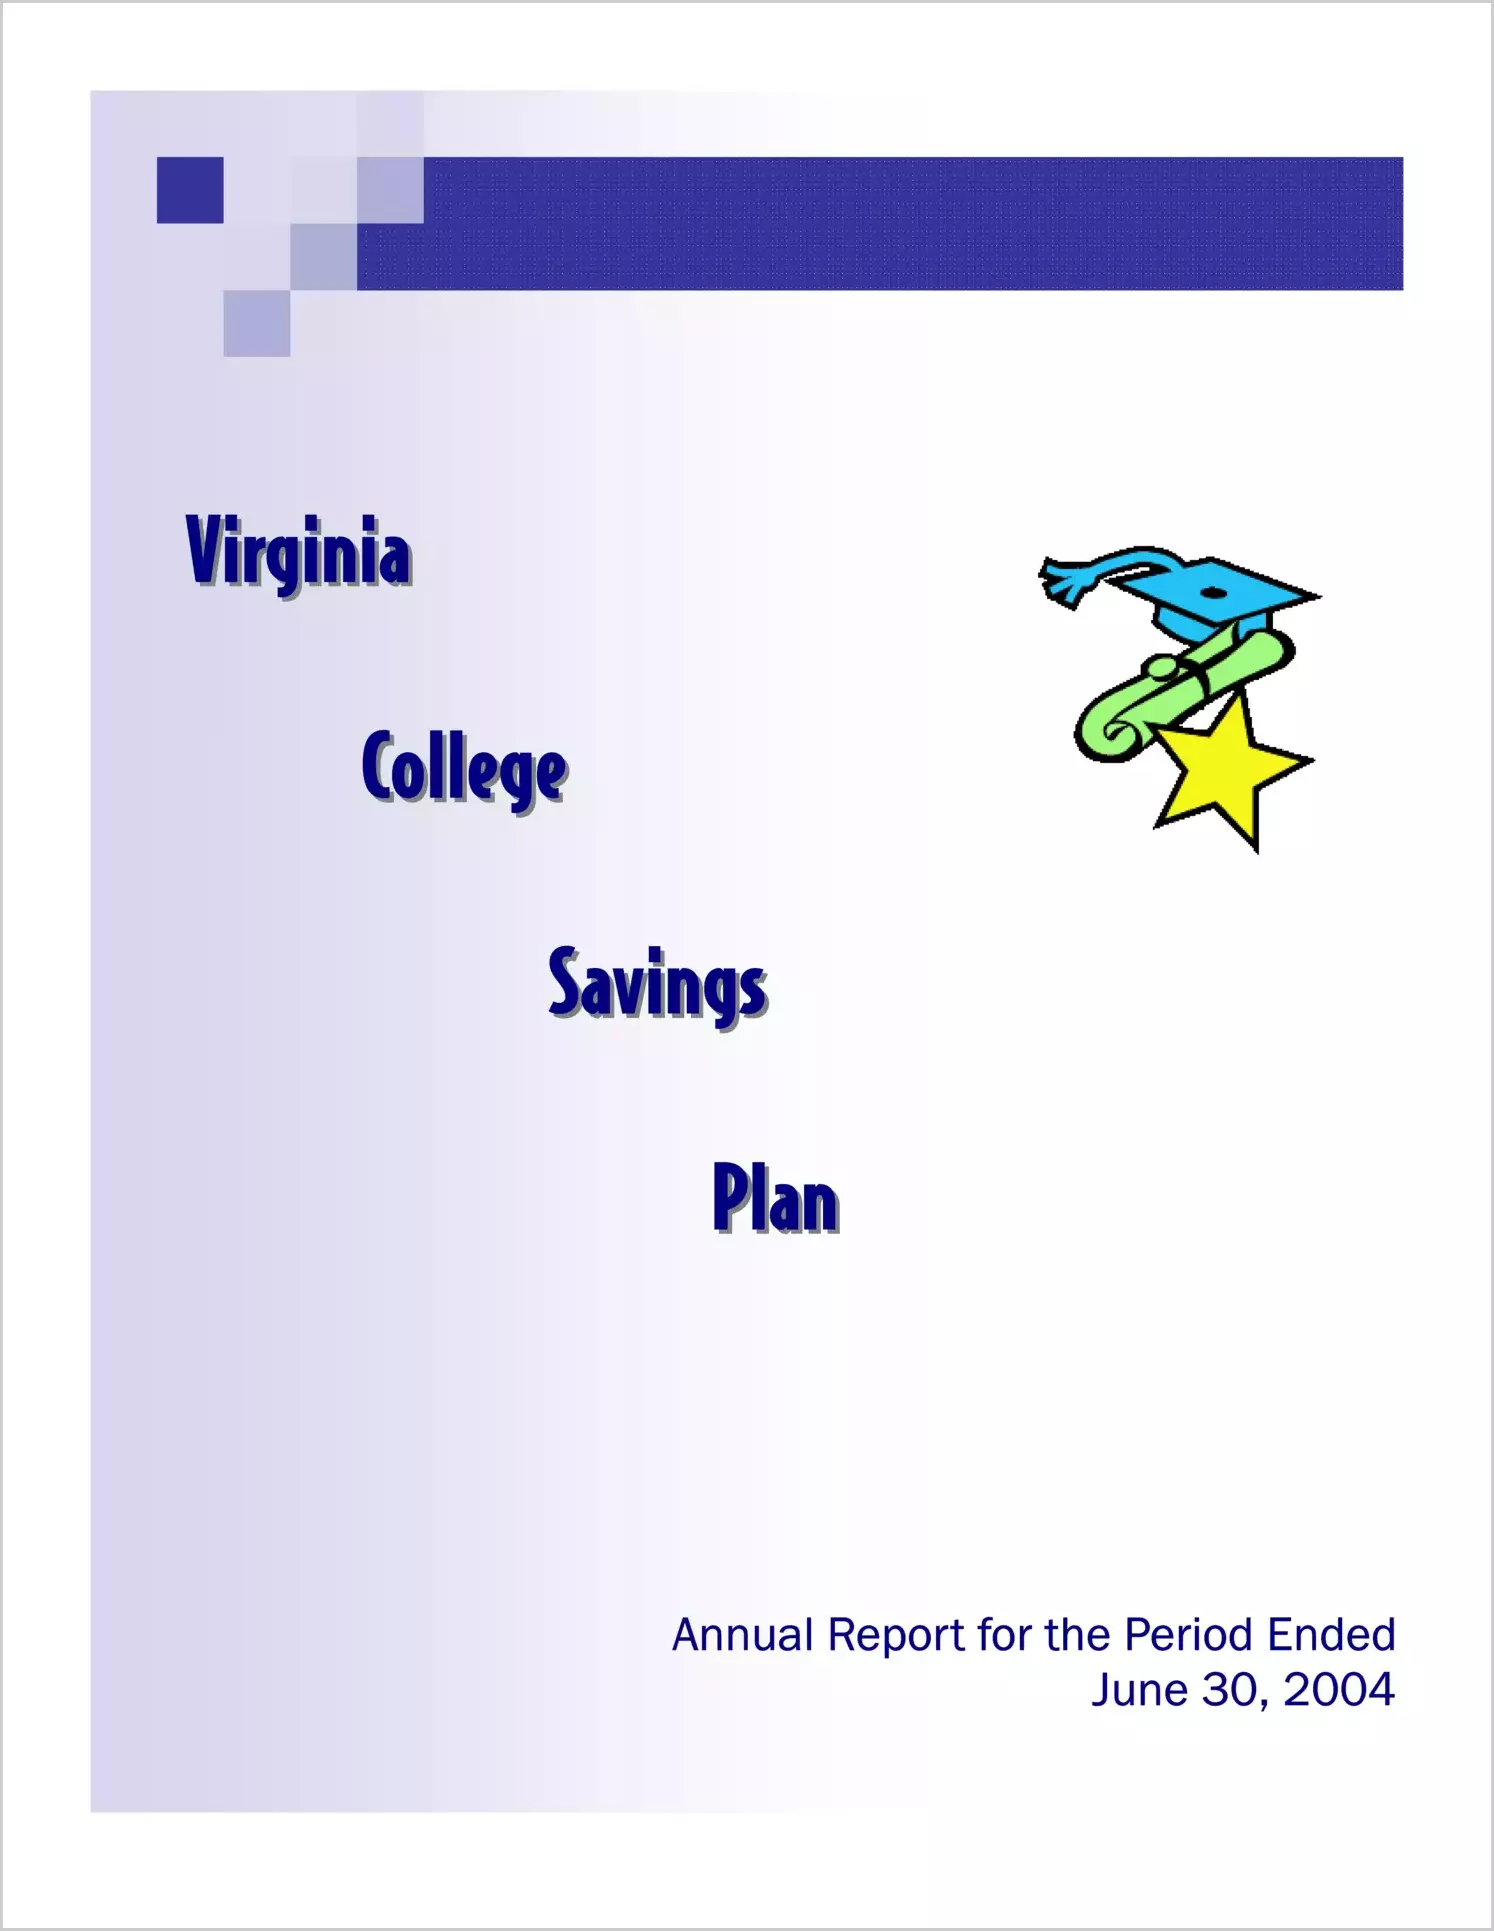 Virginia College Savings Plan Annual Report for the Period Ended June 30, 2004